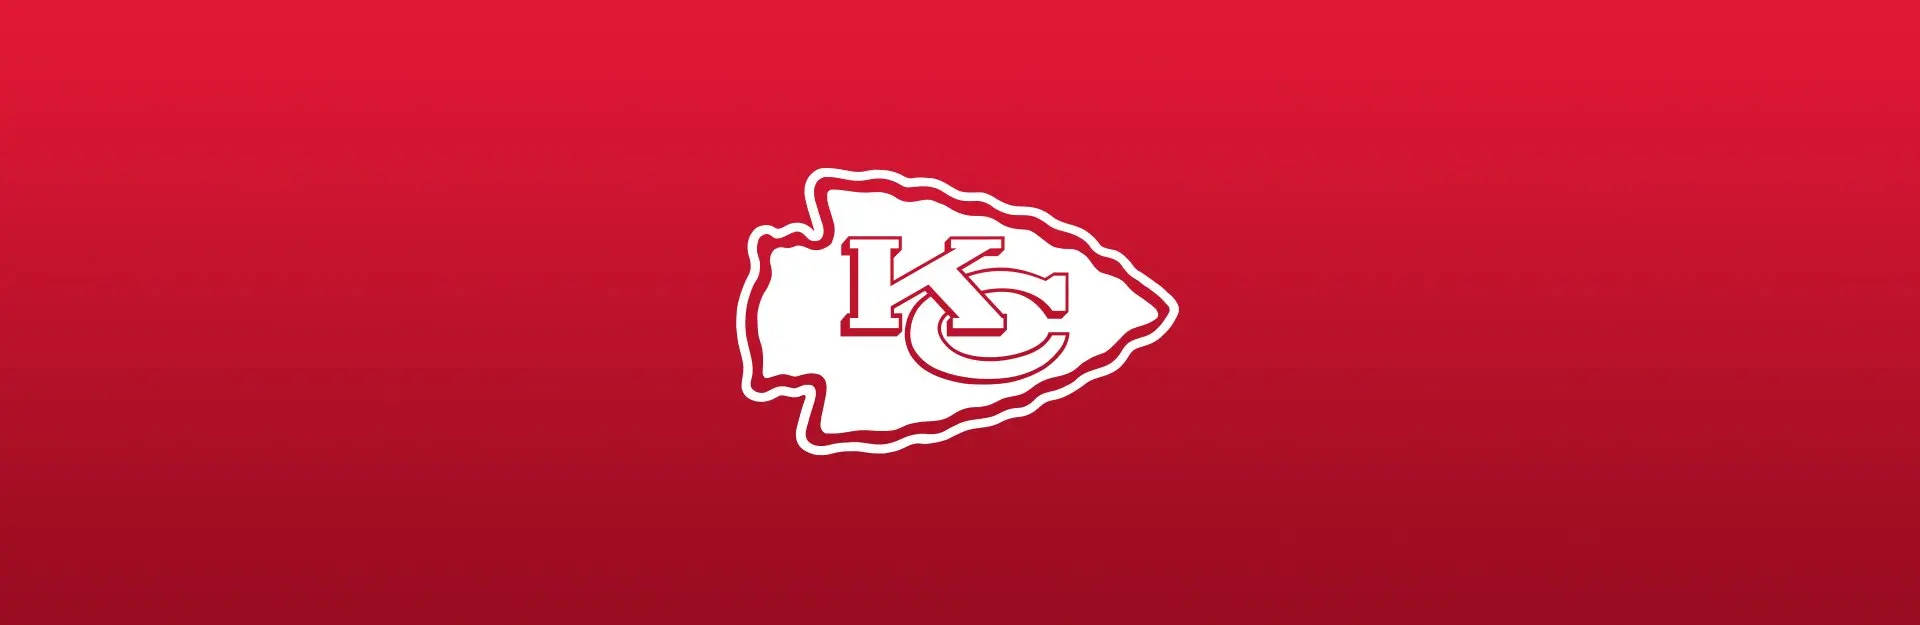 Red And White Kansas City Chiefs Logo Wallpaper